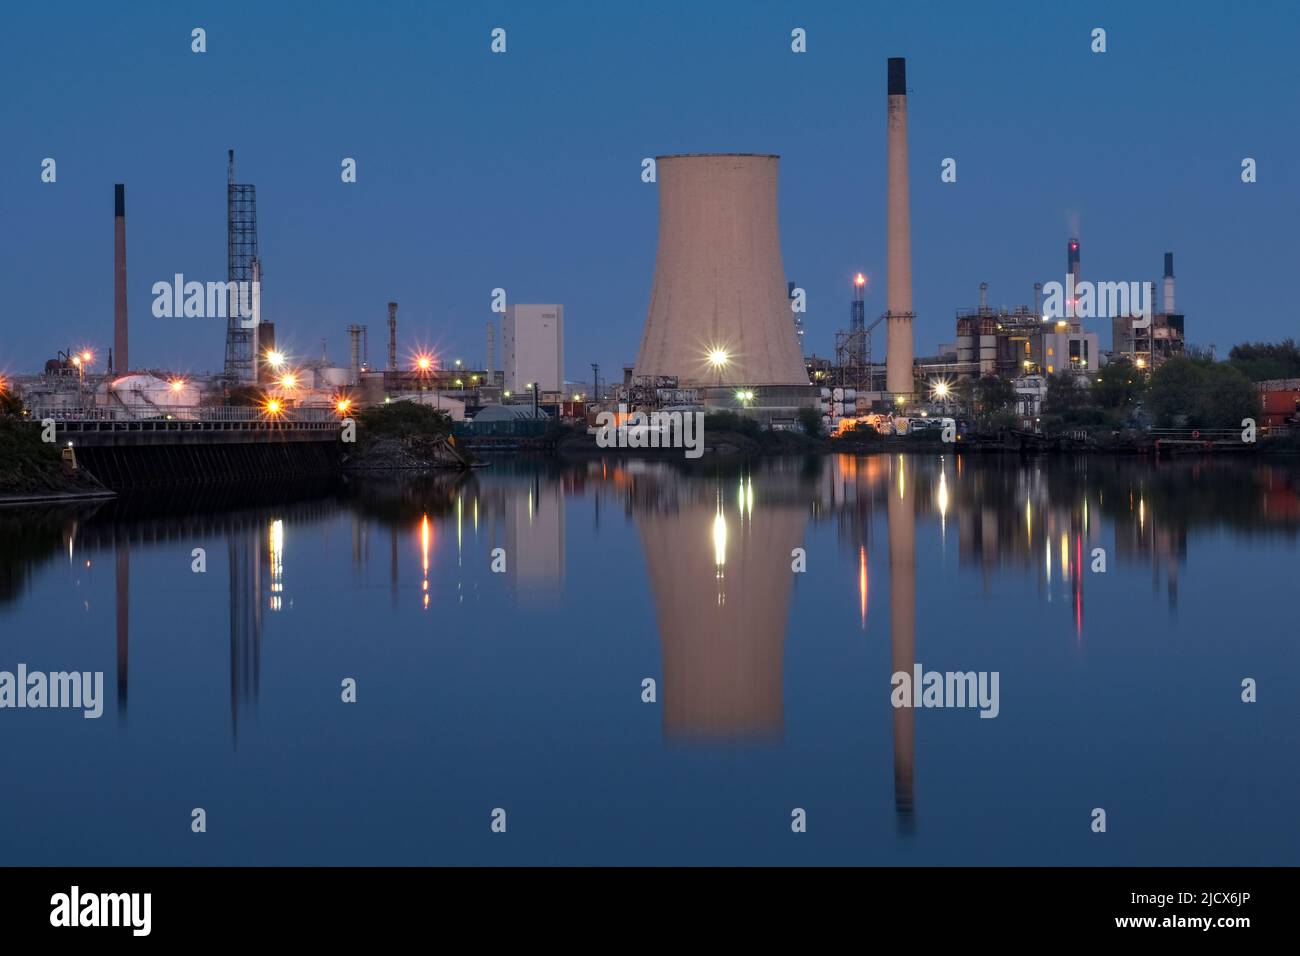 Stanlow Oil Refinery reflected in the Manchester Ship Canal at night, near Ellesmere Port, Cheshire, England, United Kingdom, Europe Stock Photo